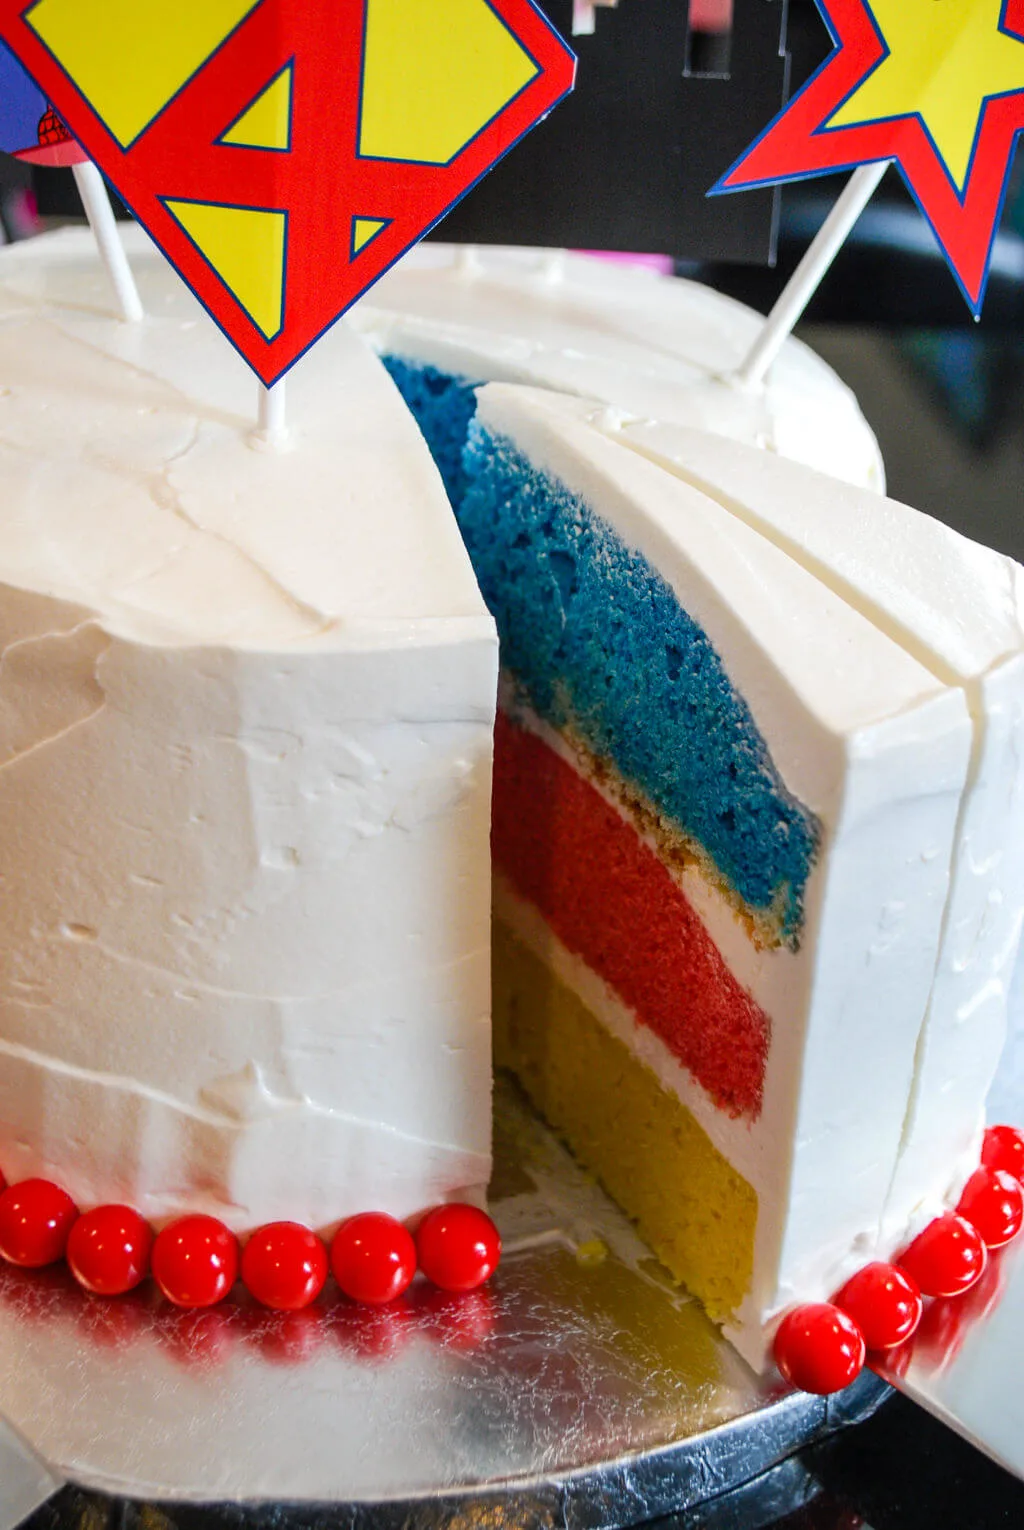 Superhero cake with colorful cake layers in yellow, red, and blue